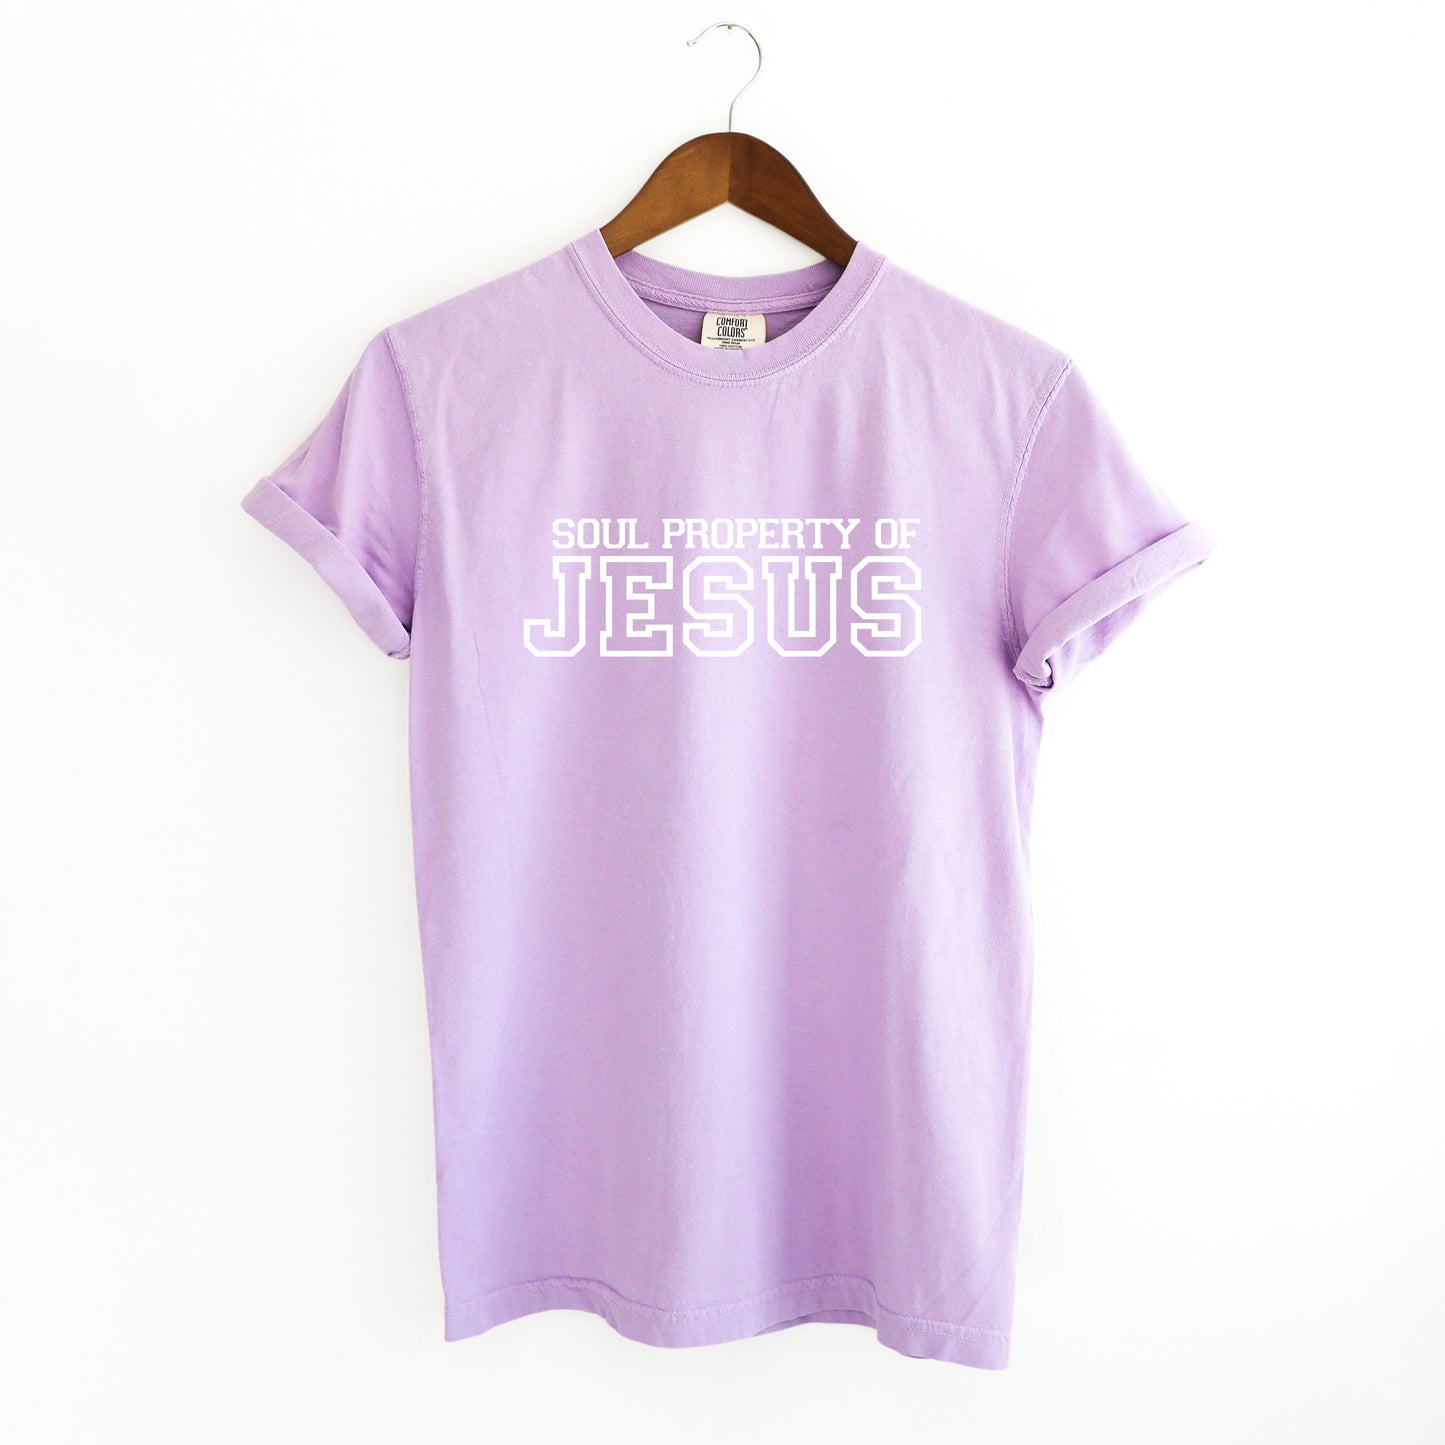 Soul Property Of Jesus | Garment Dyed Tee